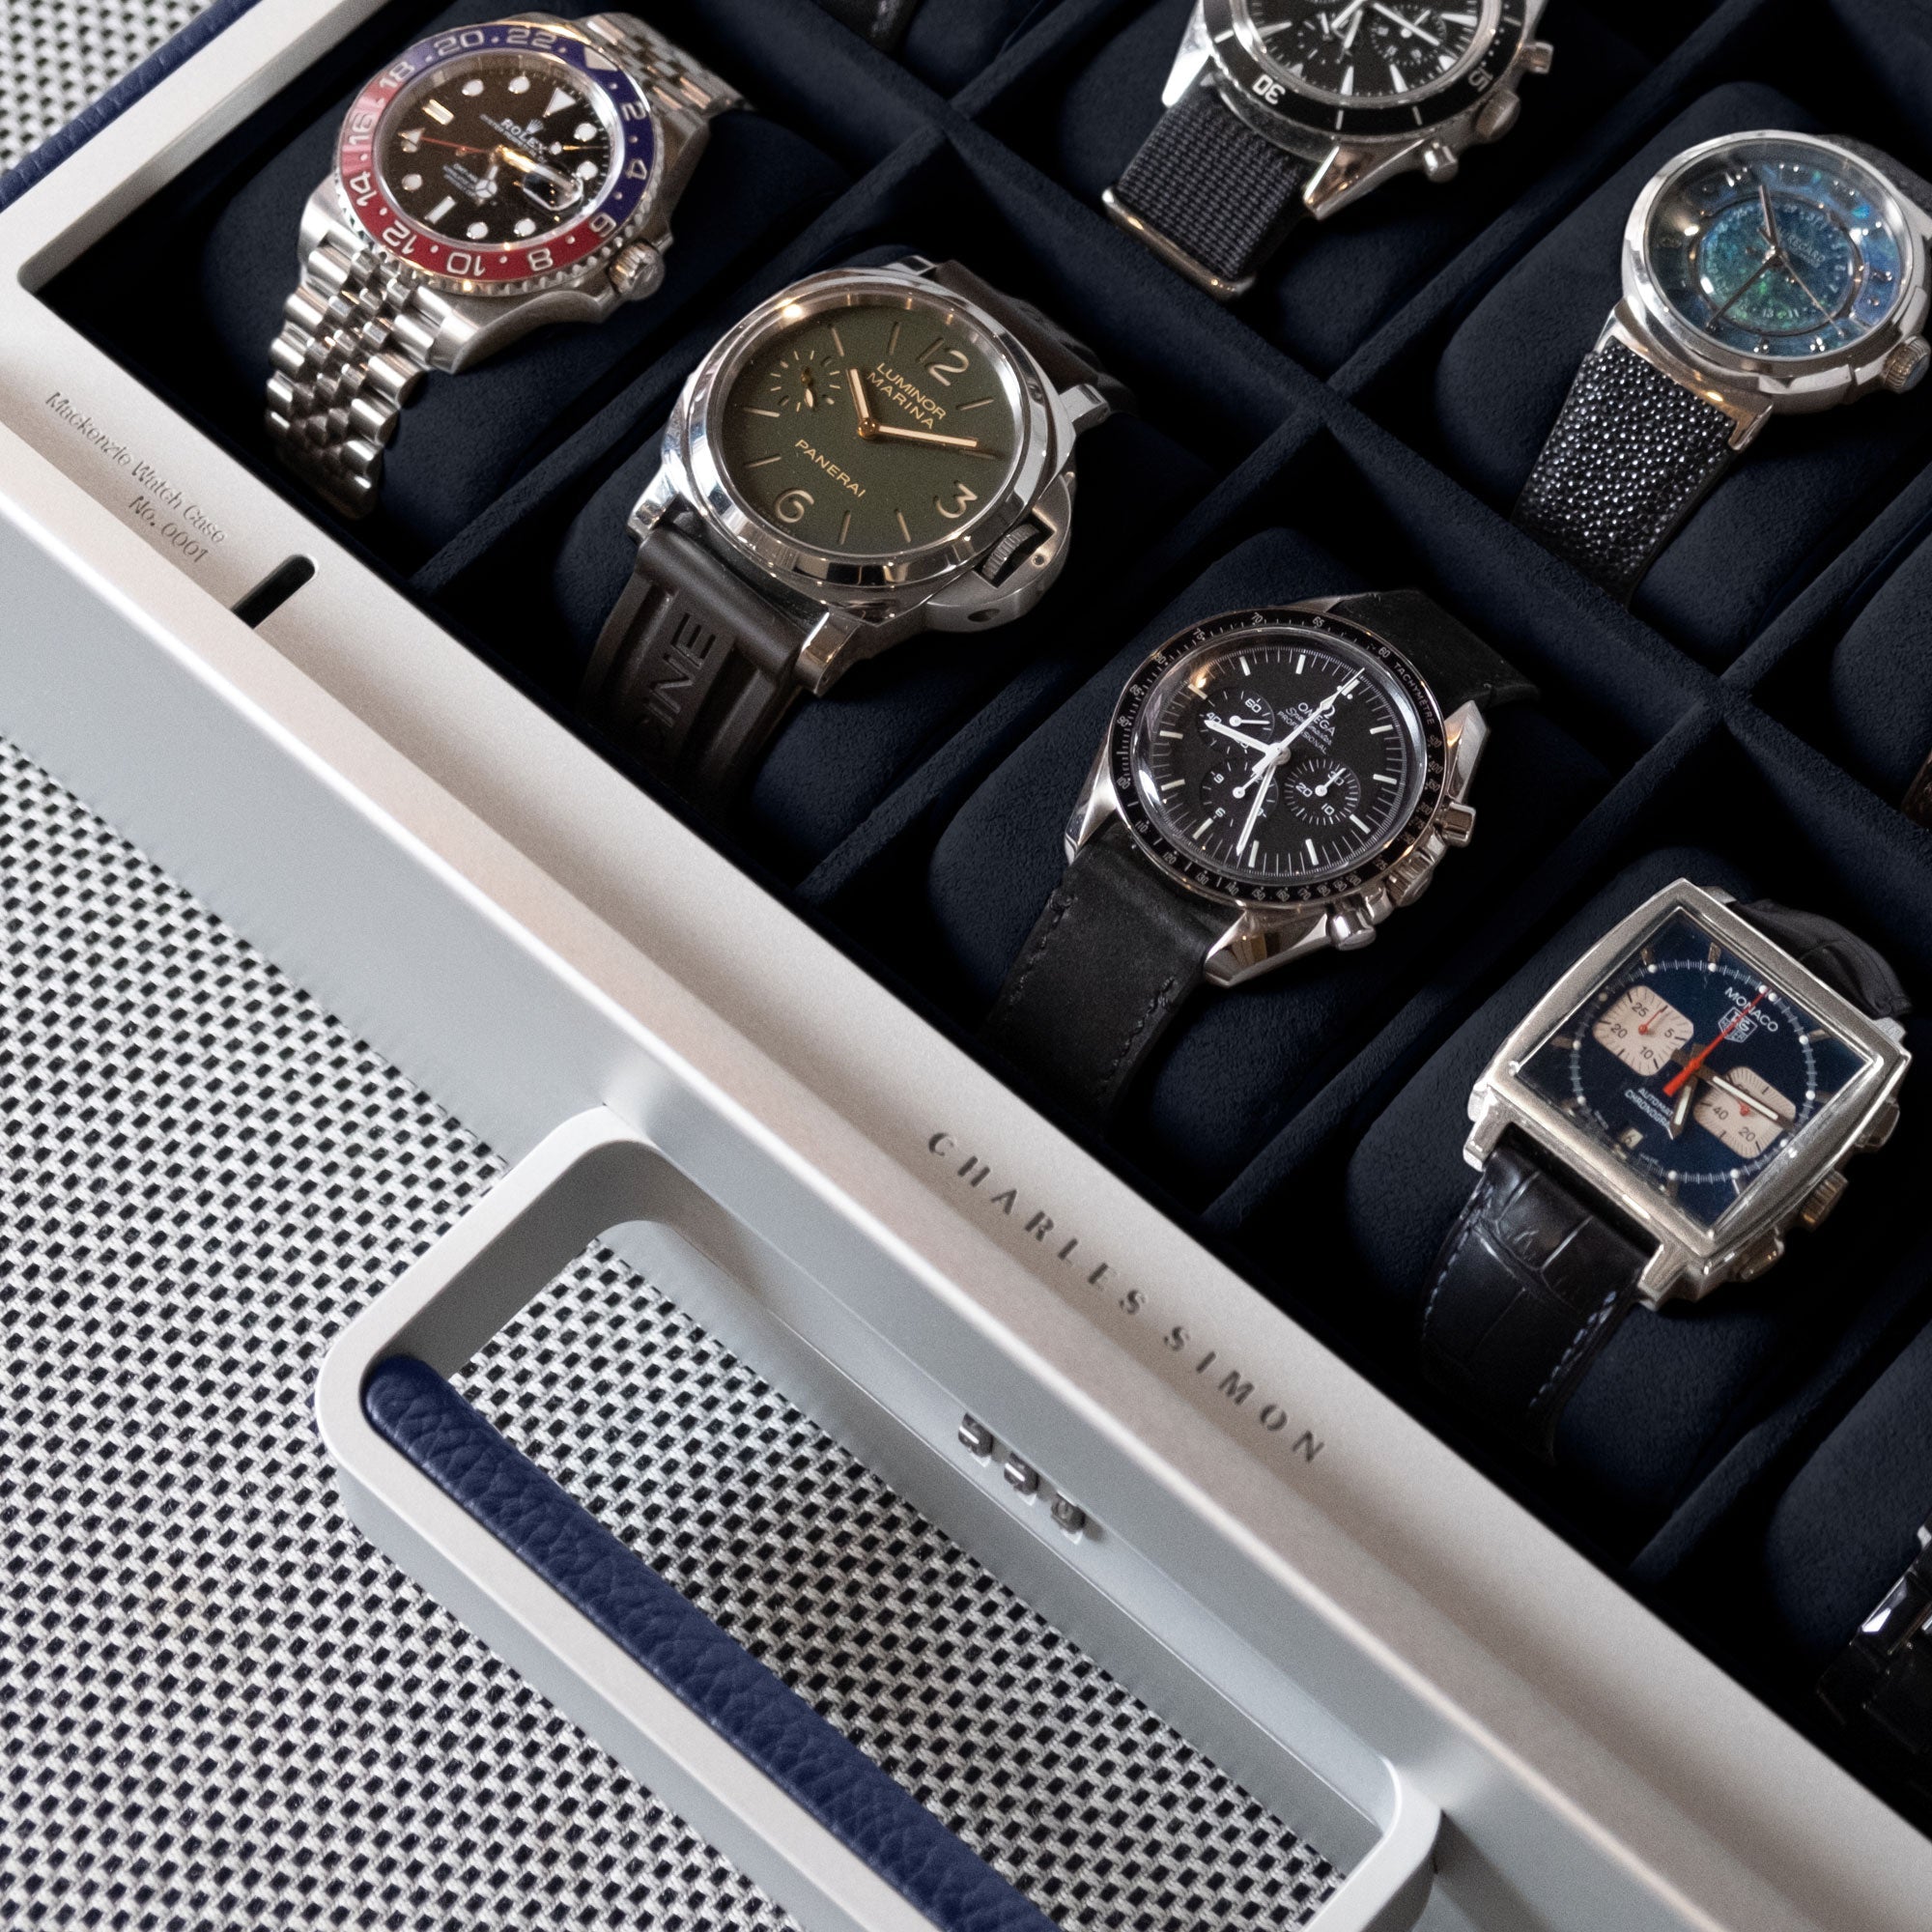 Lifestyle shot of sapphire Mackenzie 10 watch briefcase full of luxury men's watches including Omega, Rolex and Panerai